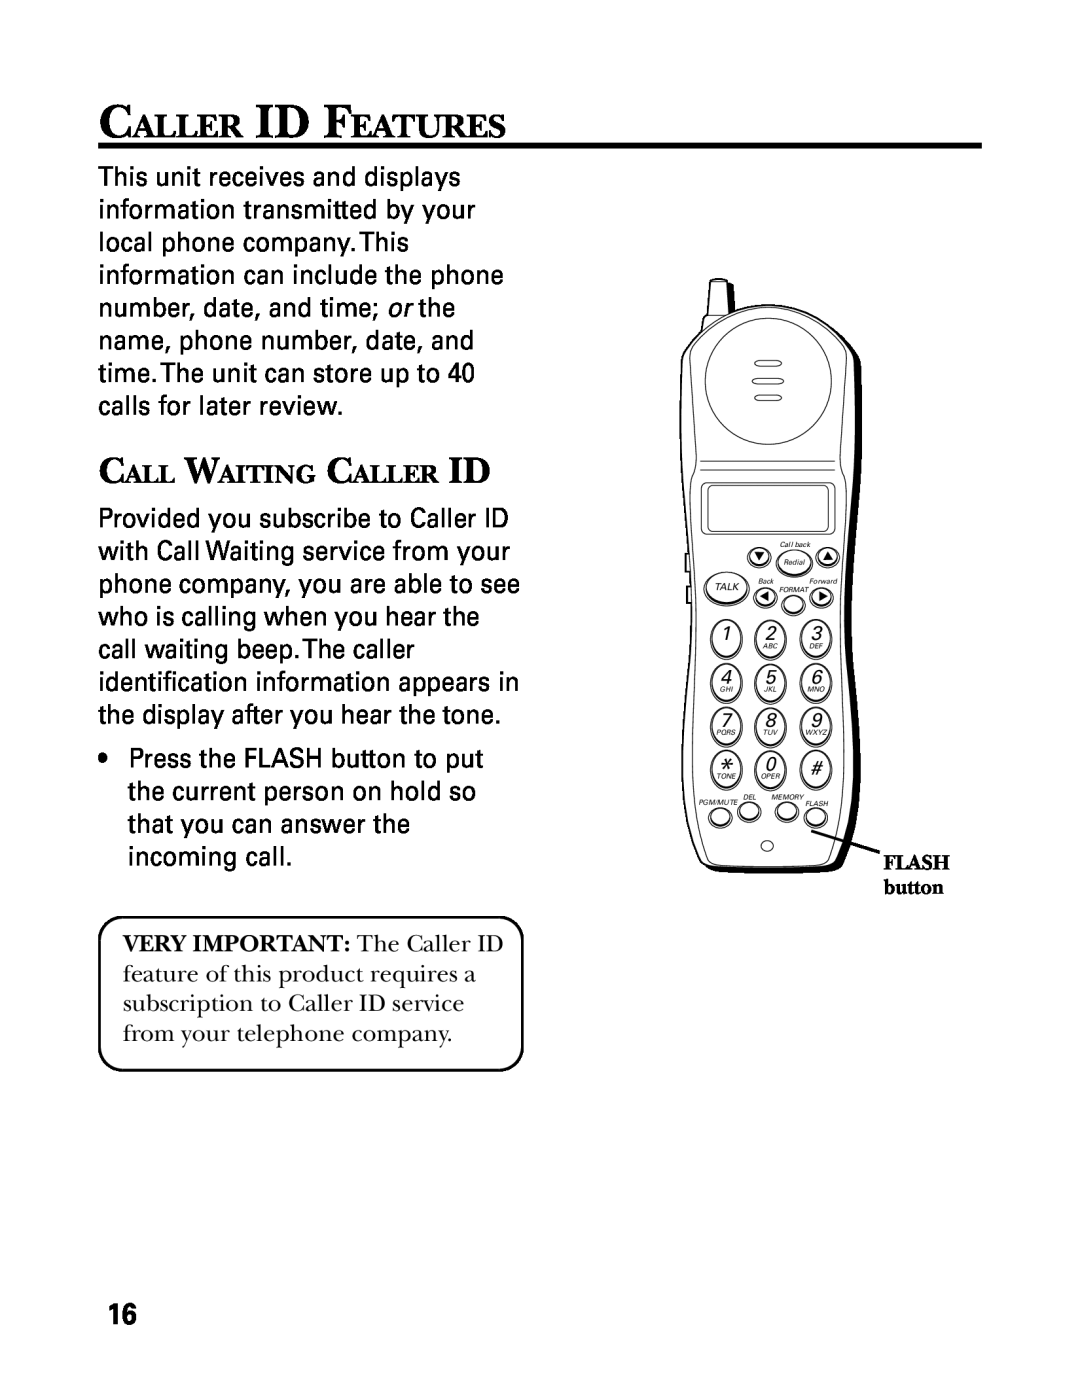 GE 27730 manual Caller Id Features, Call Waiting Caller Id 